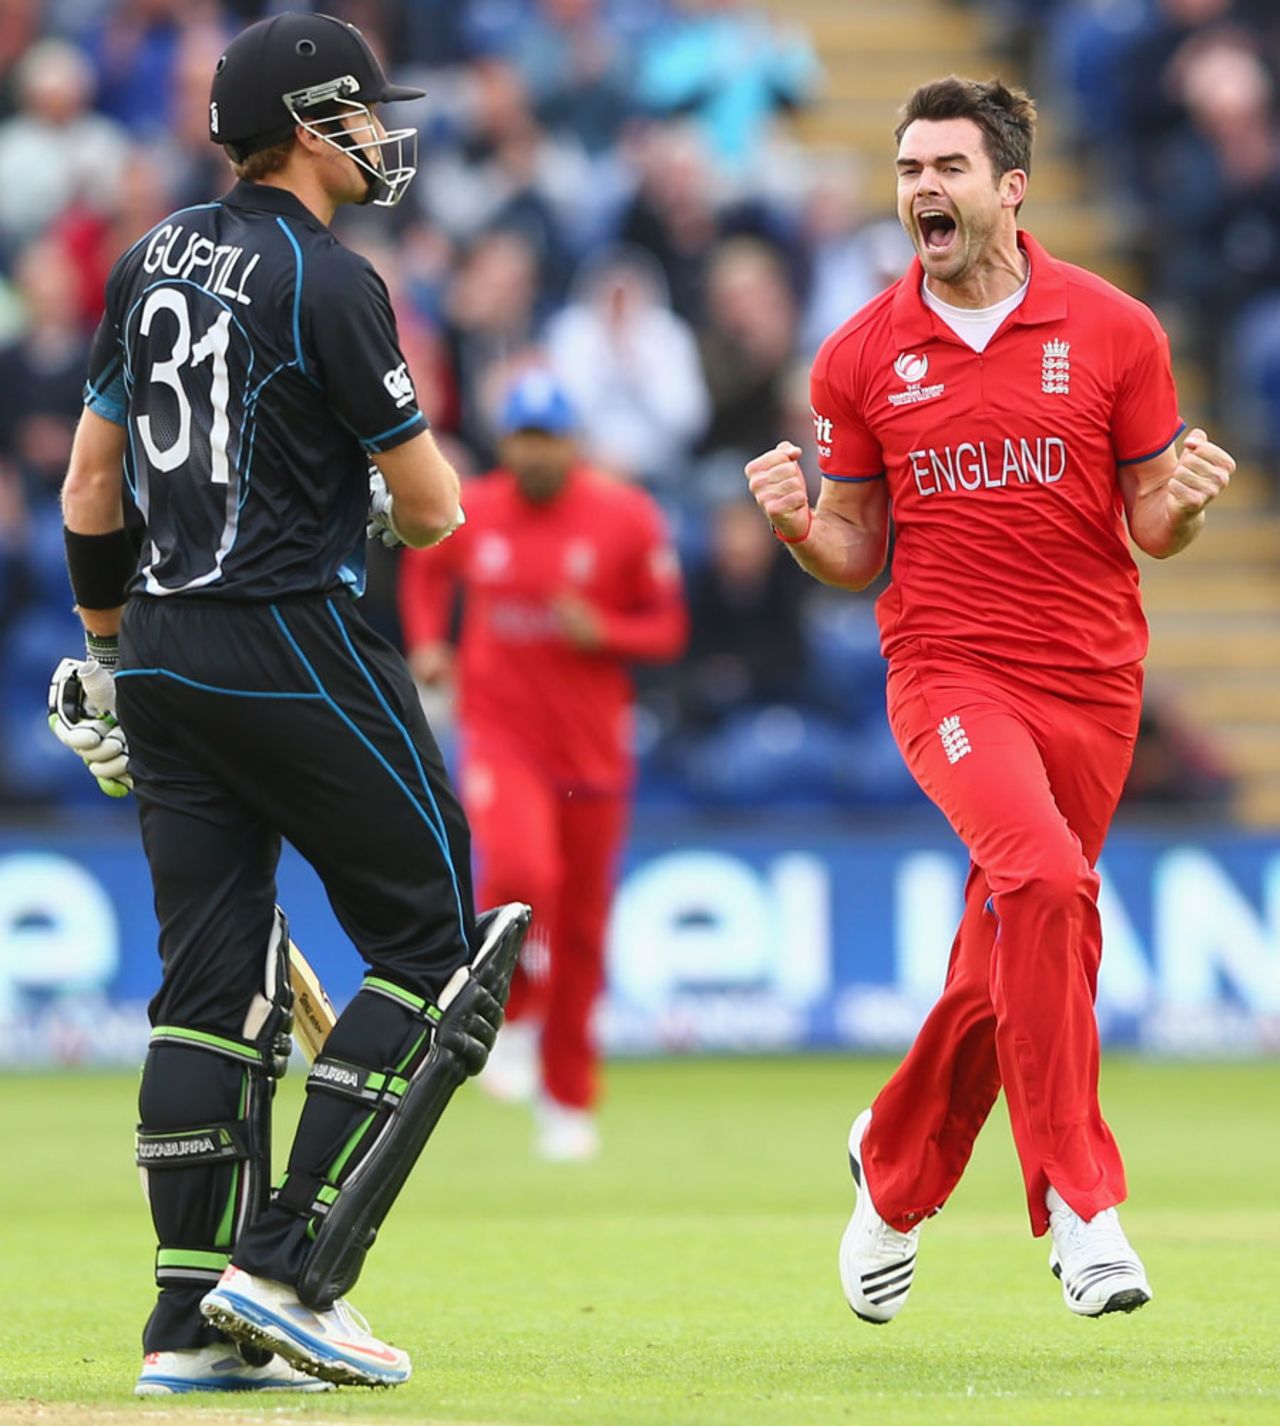 James Anderson is jubliant after snaring Martin Guptill, England v New Zealand, Champions Trophy, Group A, Cardiff, June 16, 2013